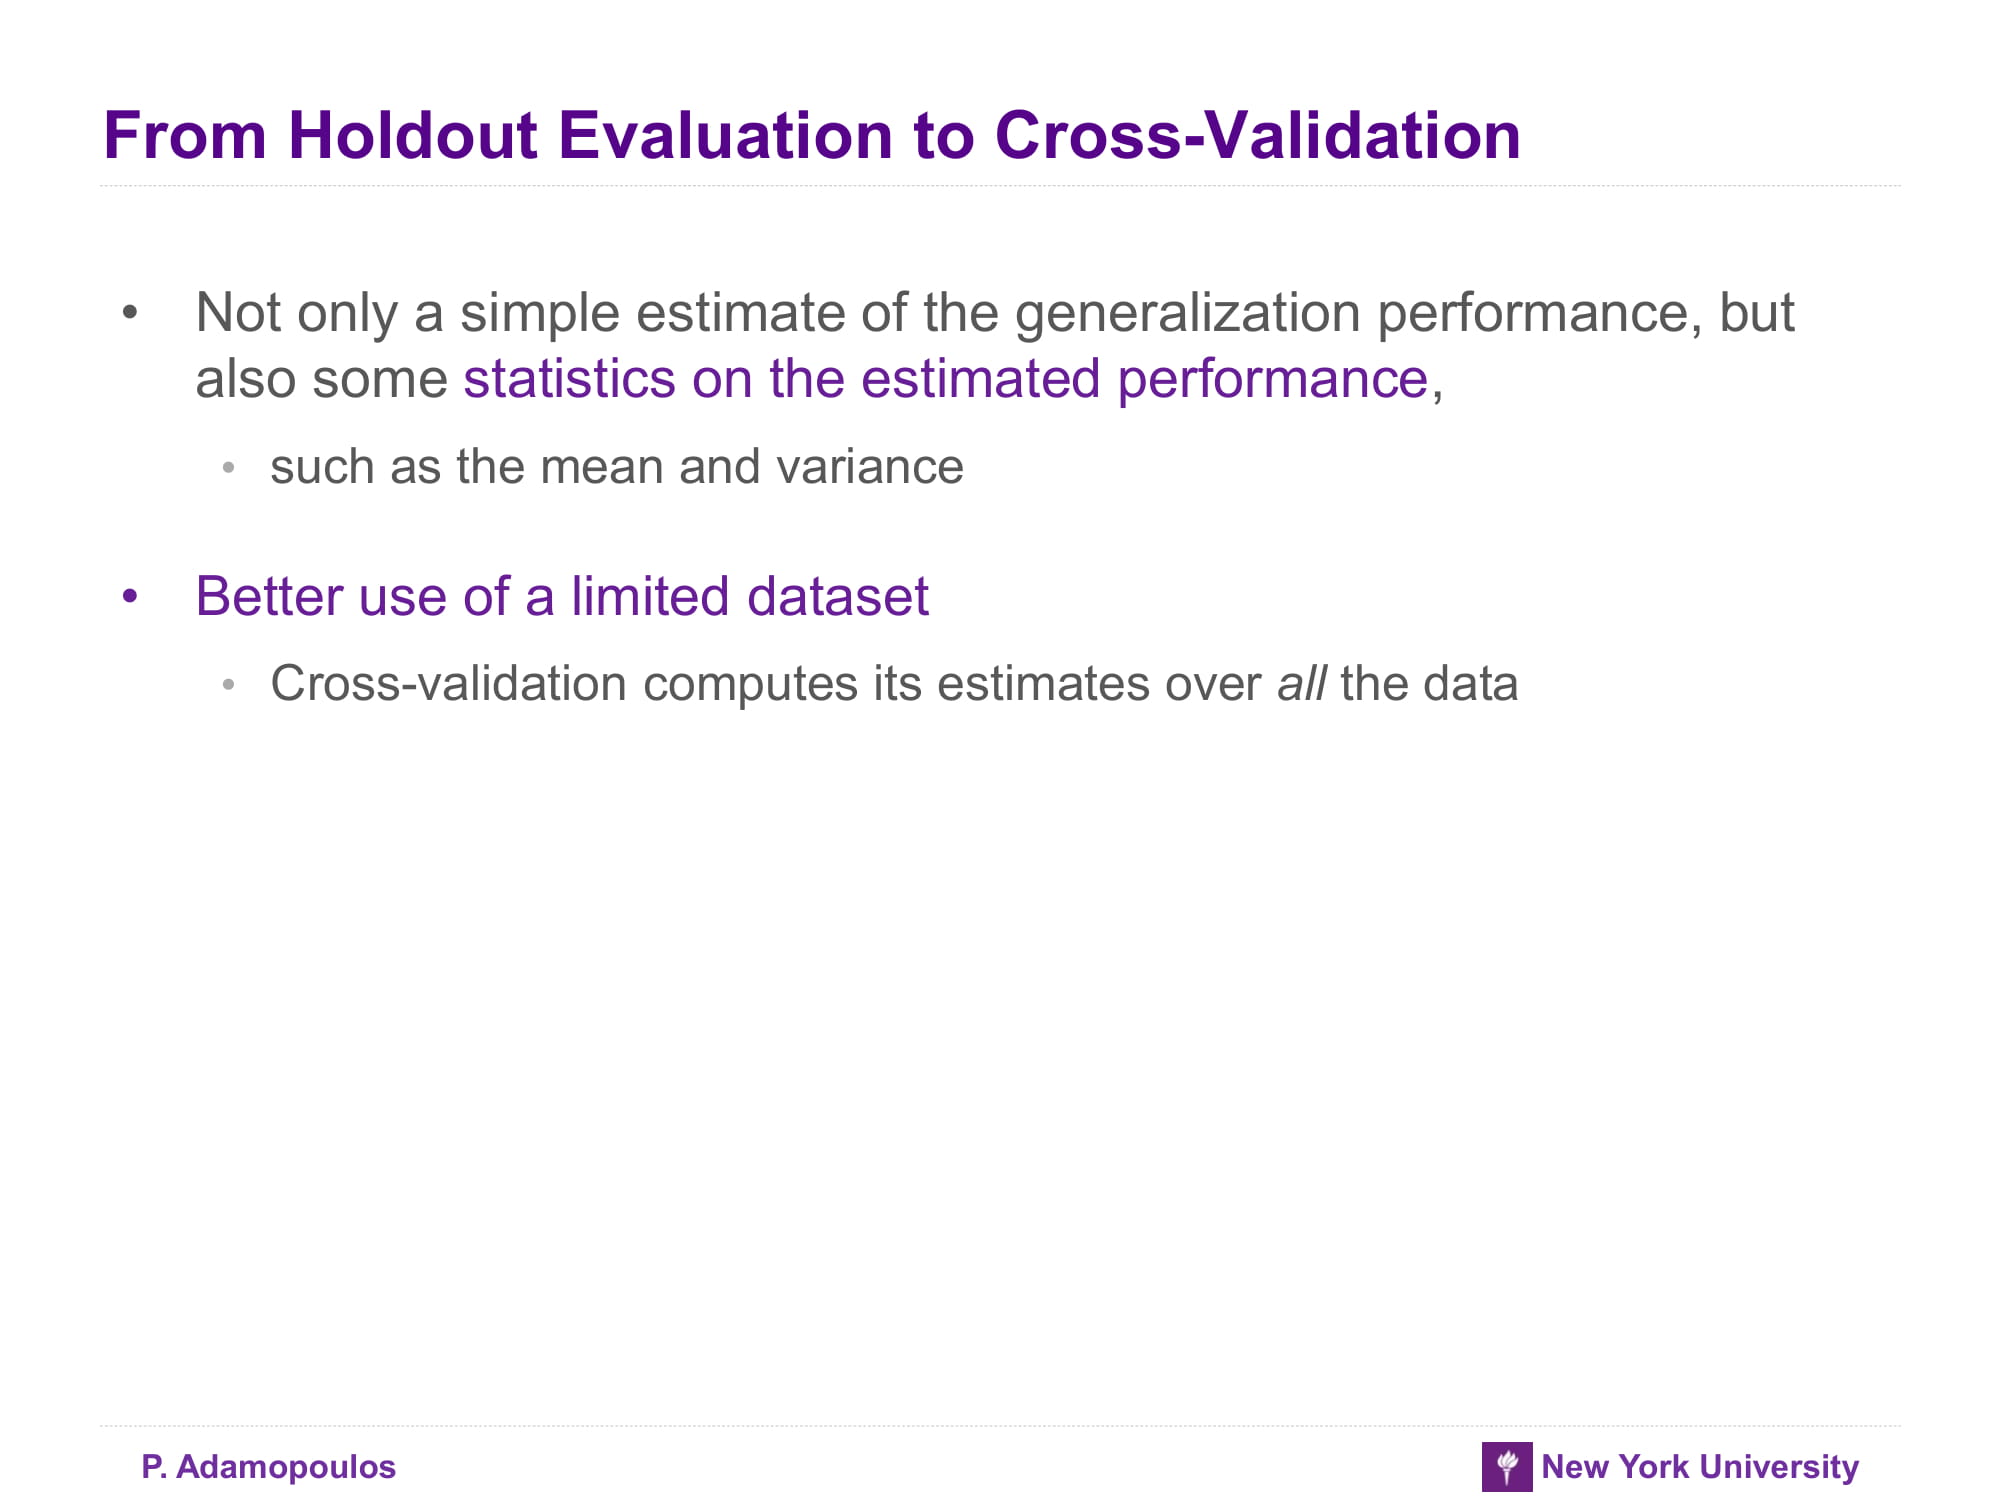 From Holdout Evaluation to Cross-Validation